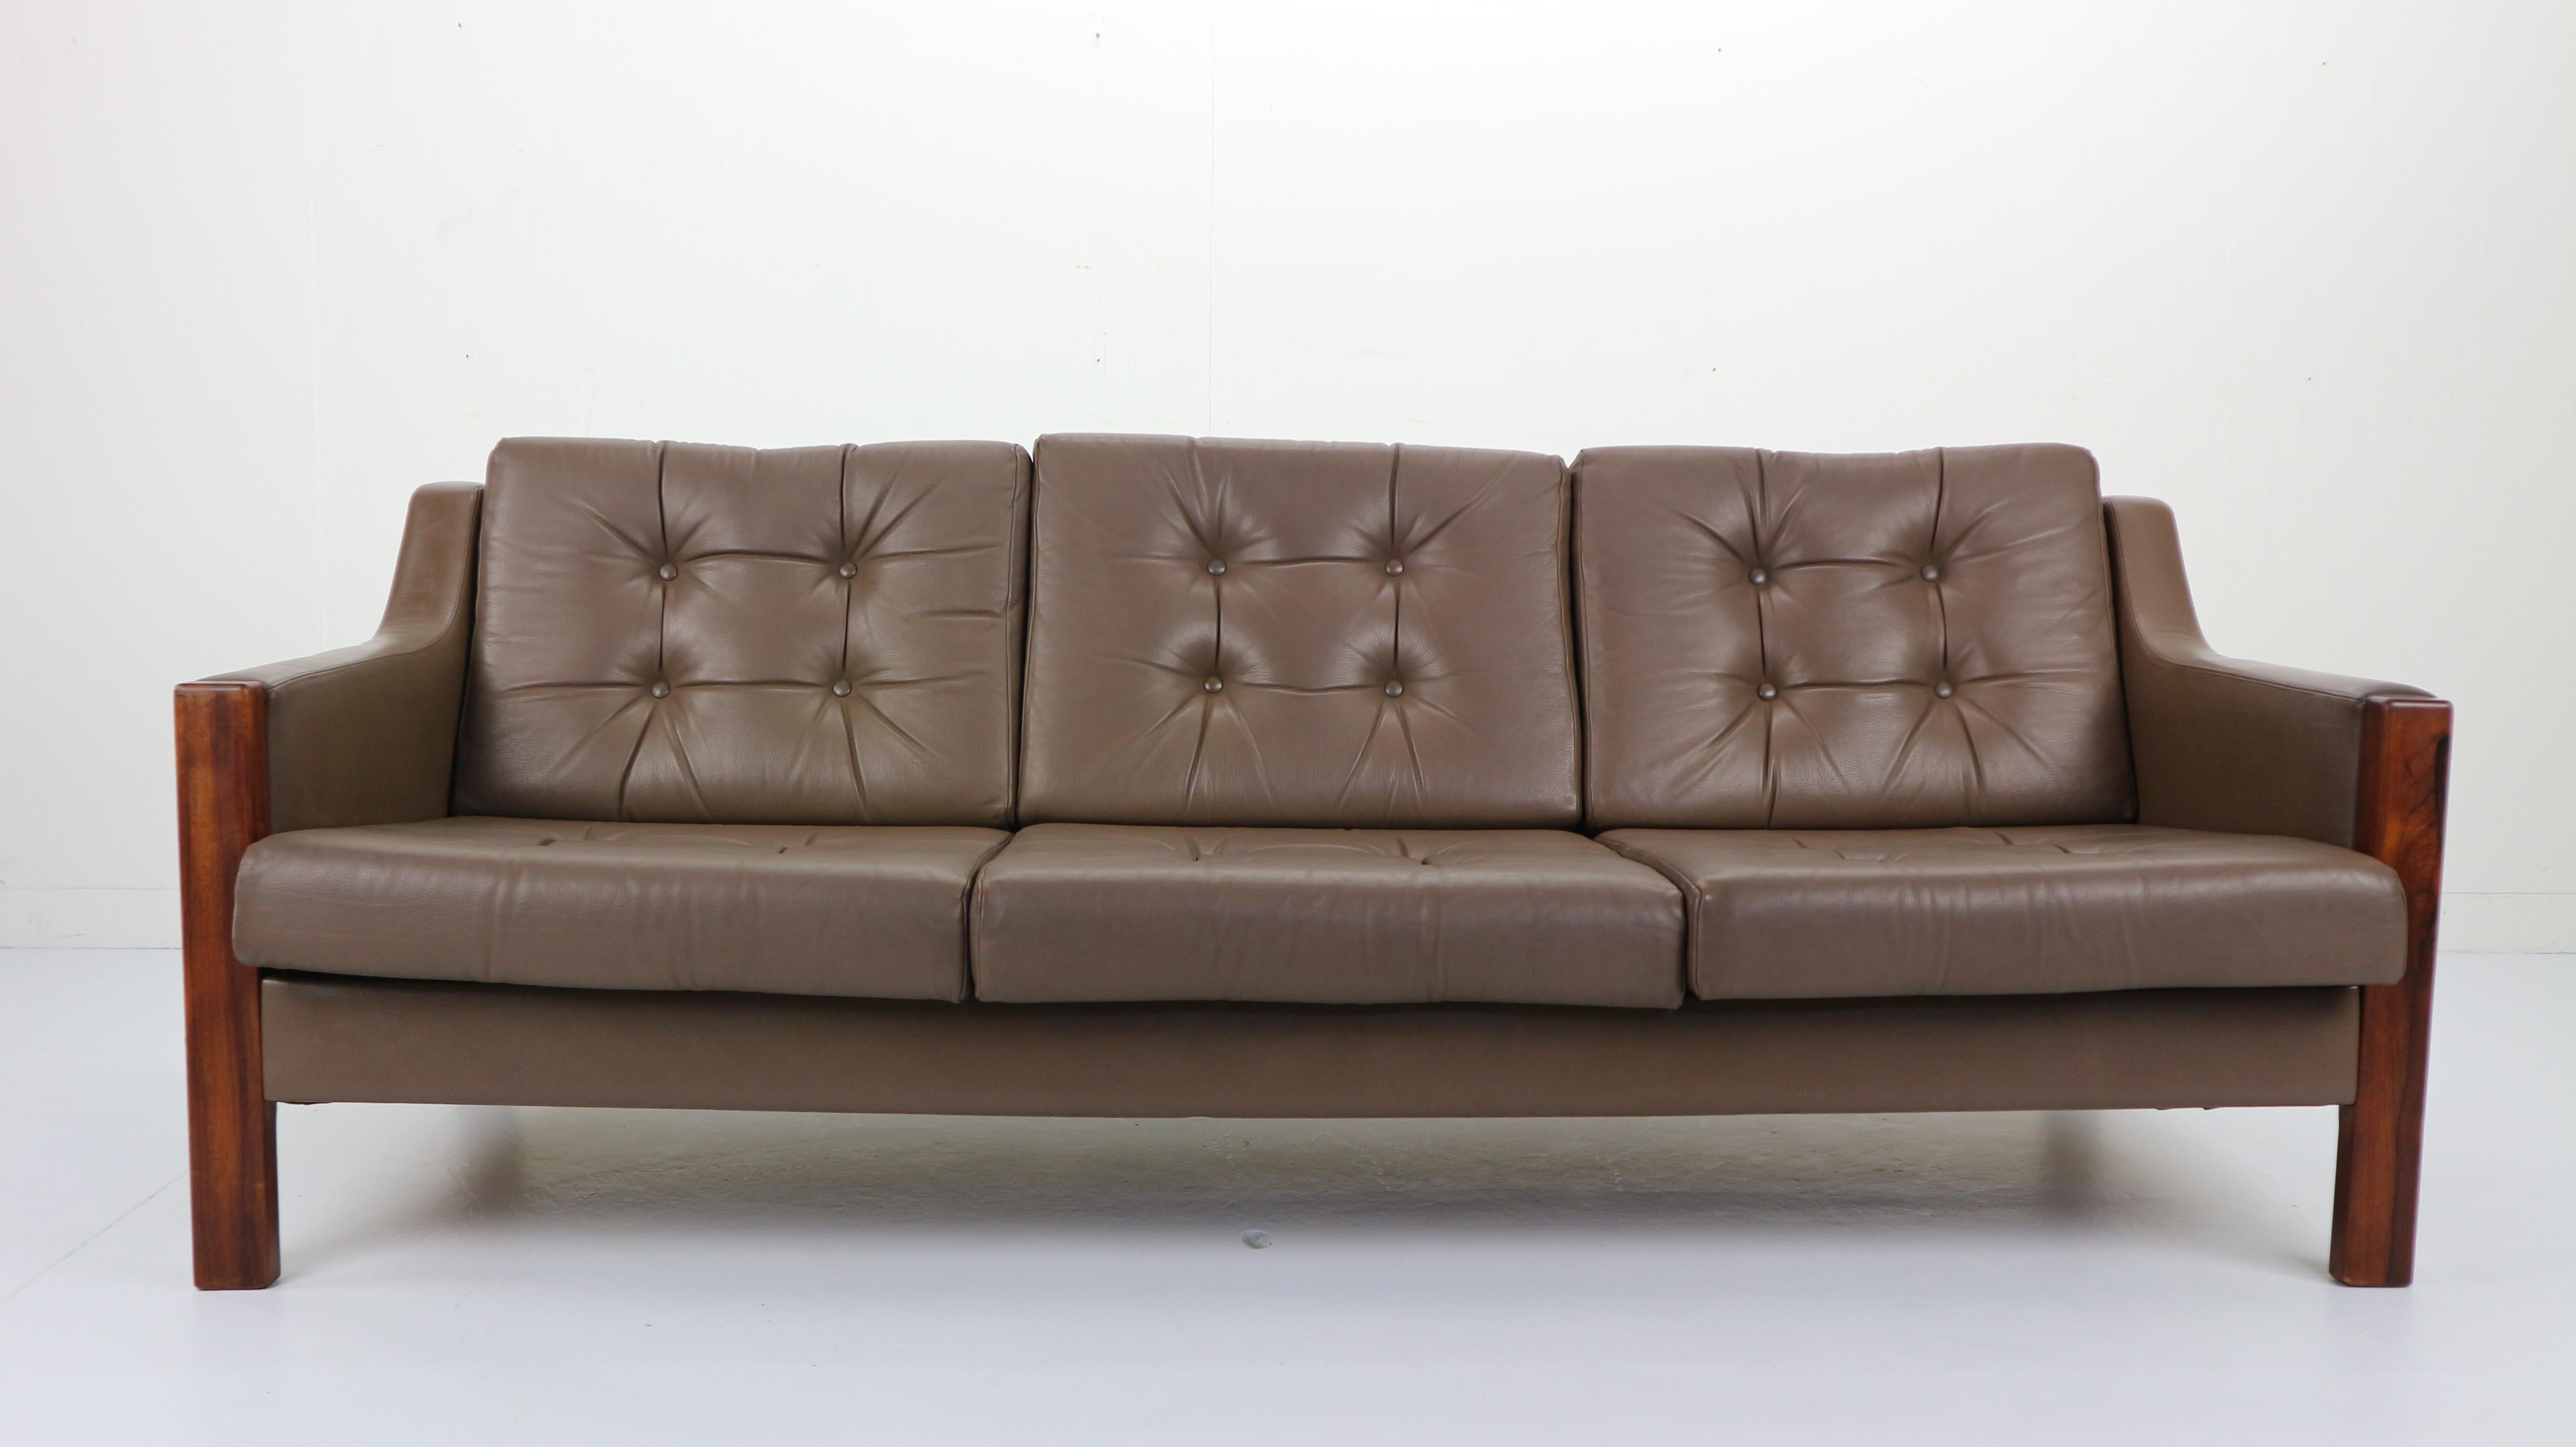 Scandinavian design three-seat comfortable sofa made in late 1960s-early 1970s.
High quality leather seating and rosewood frame.
Good vintage condition. Patinated with signs of wear consistent with age and use.
In a style of Hans J. Wegner.
 